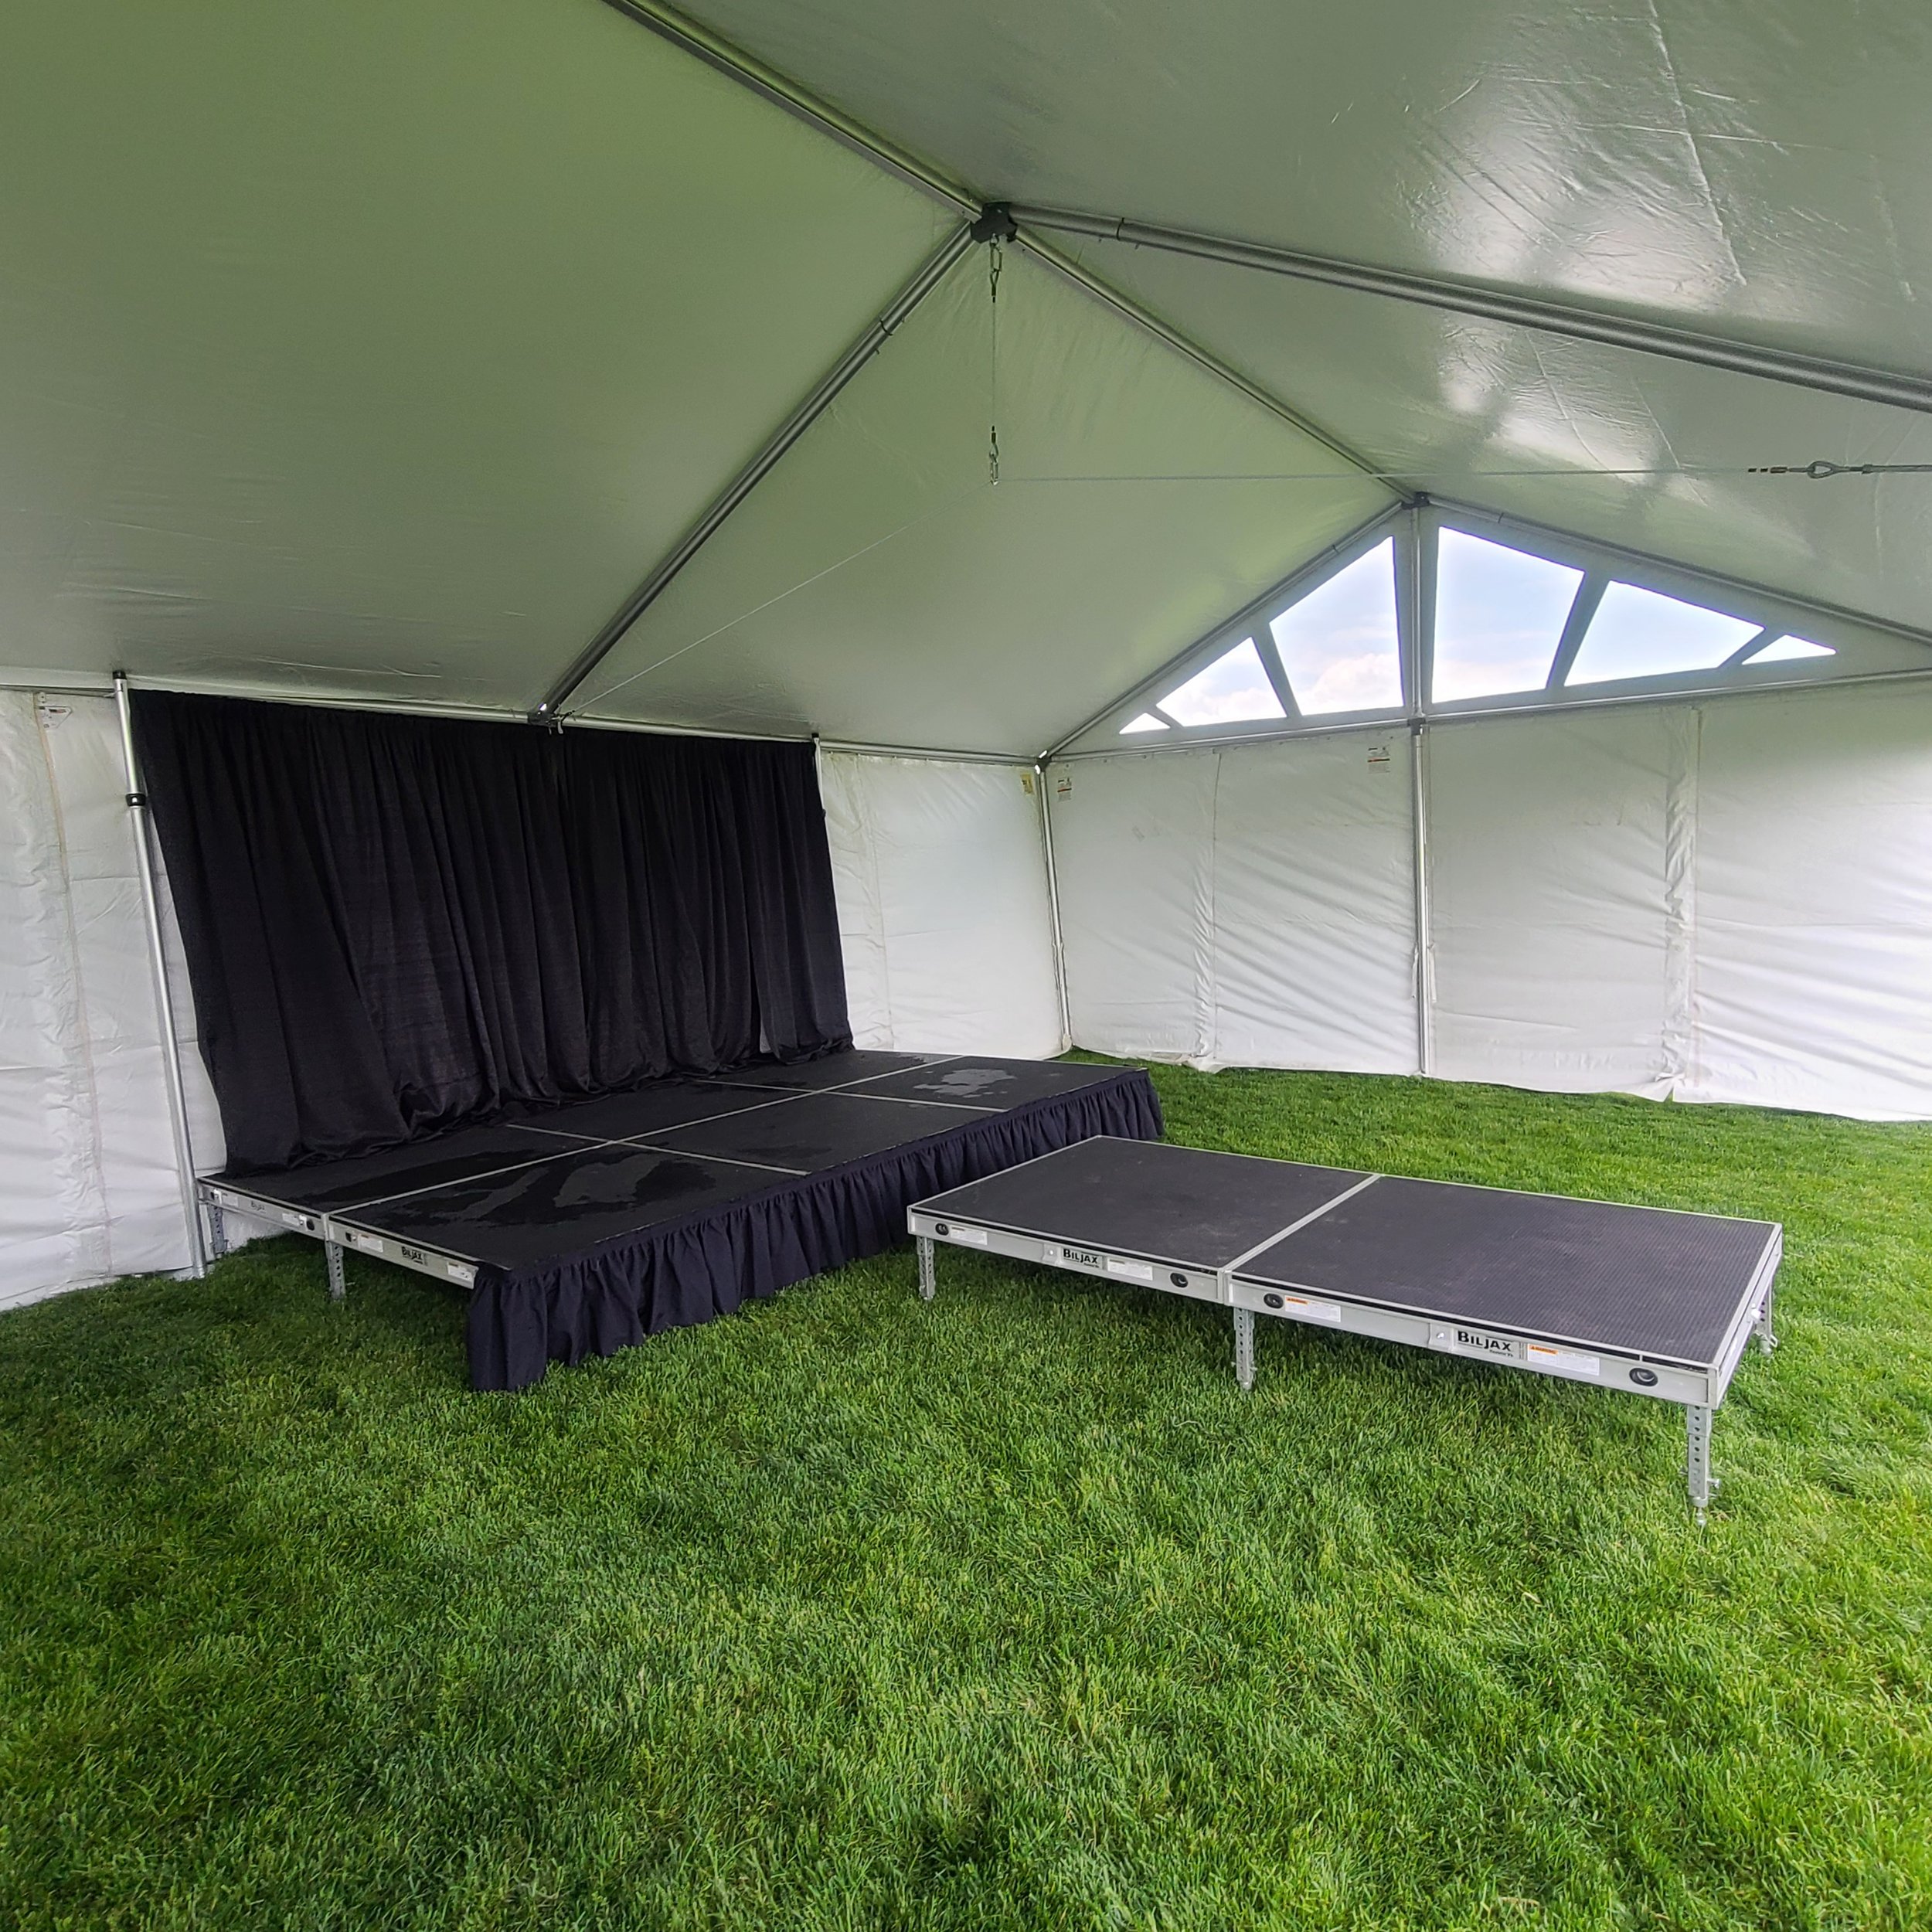 Graduation ceremony stage in tent